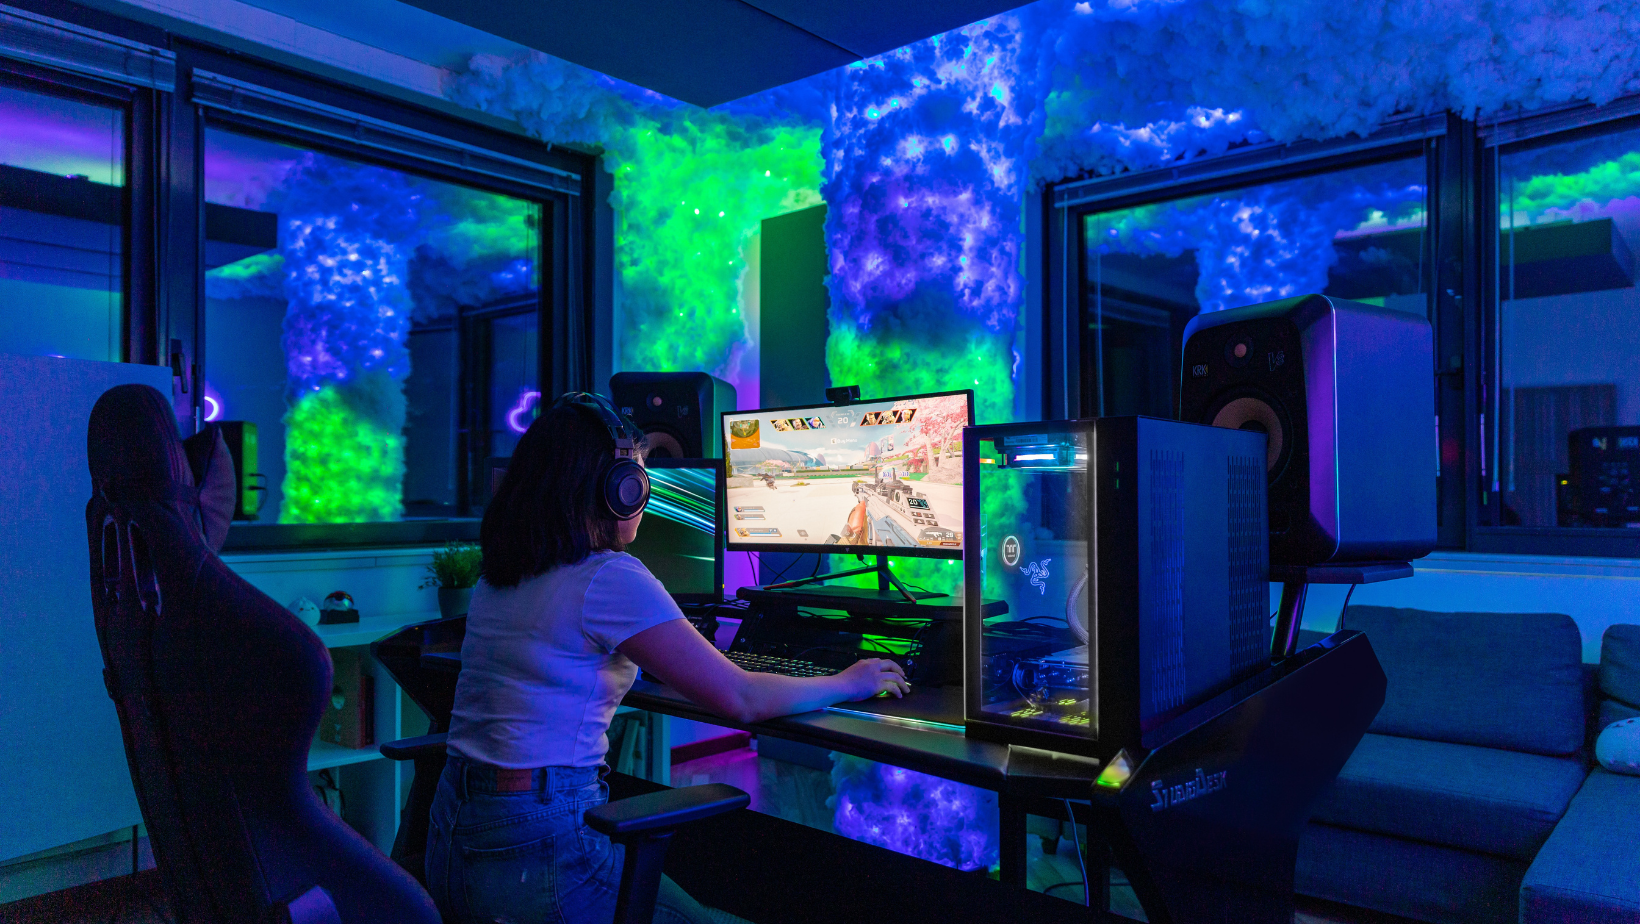 Twinkly For Gamers - Dynamic LED Lighting for Immersive Gaming